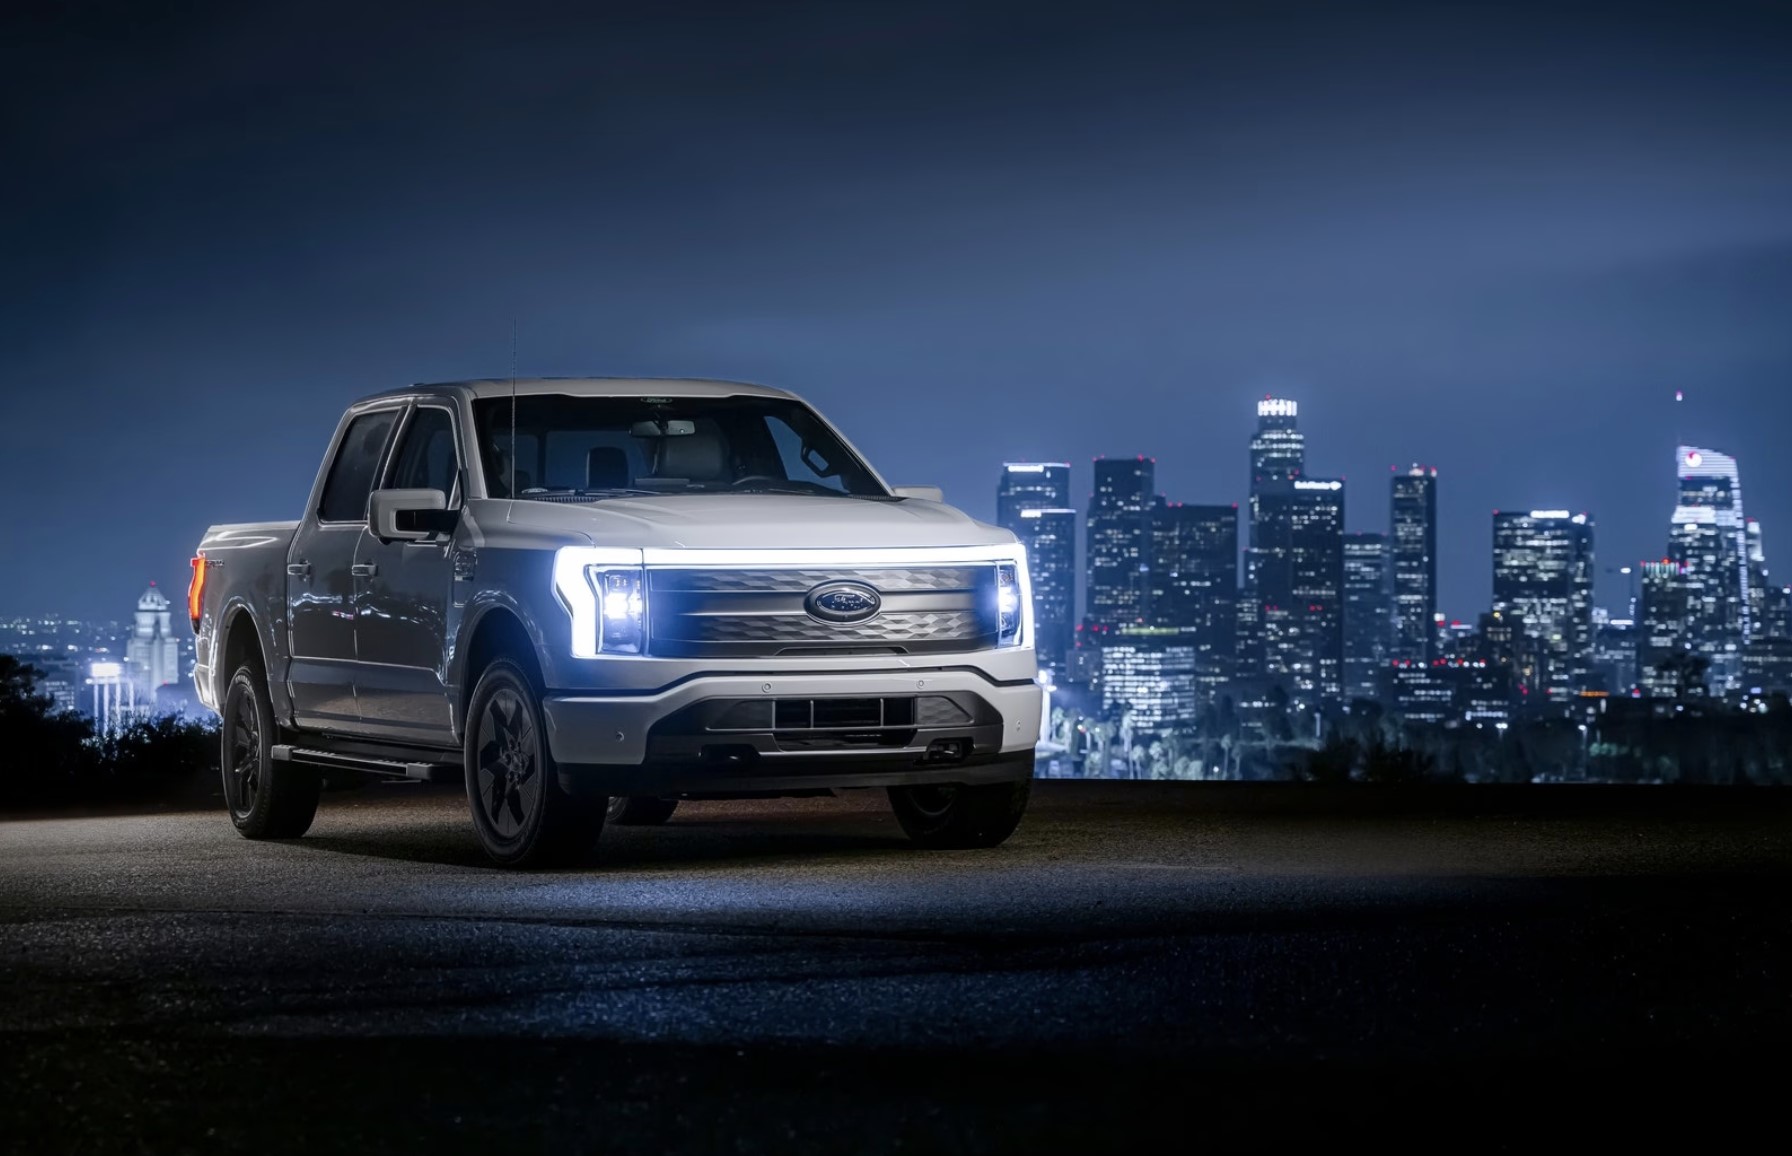 The 2023 Ford F-150 Lightning parked near a city at night